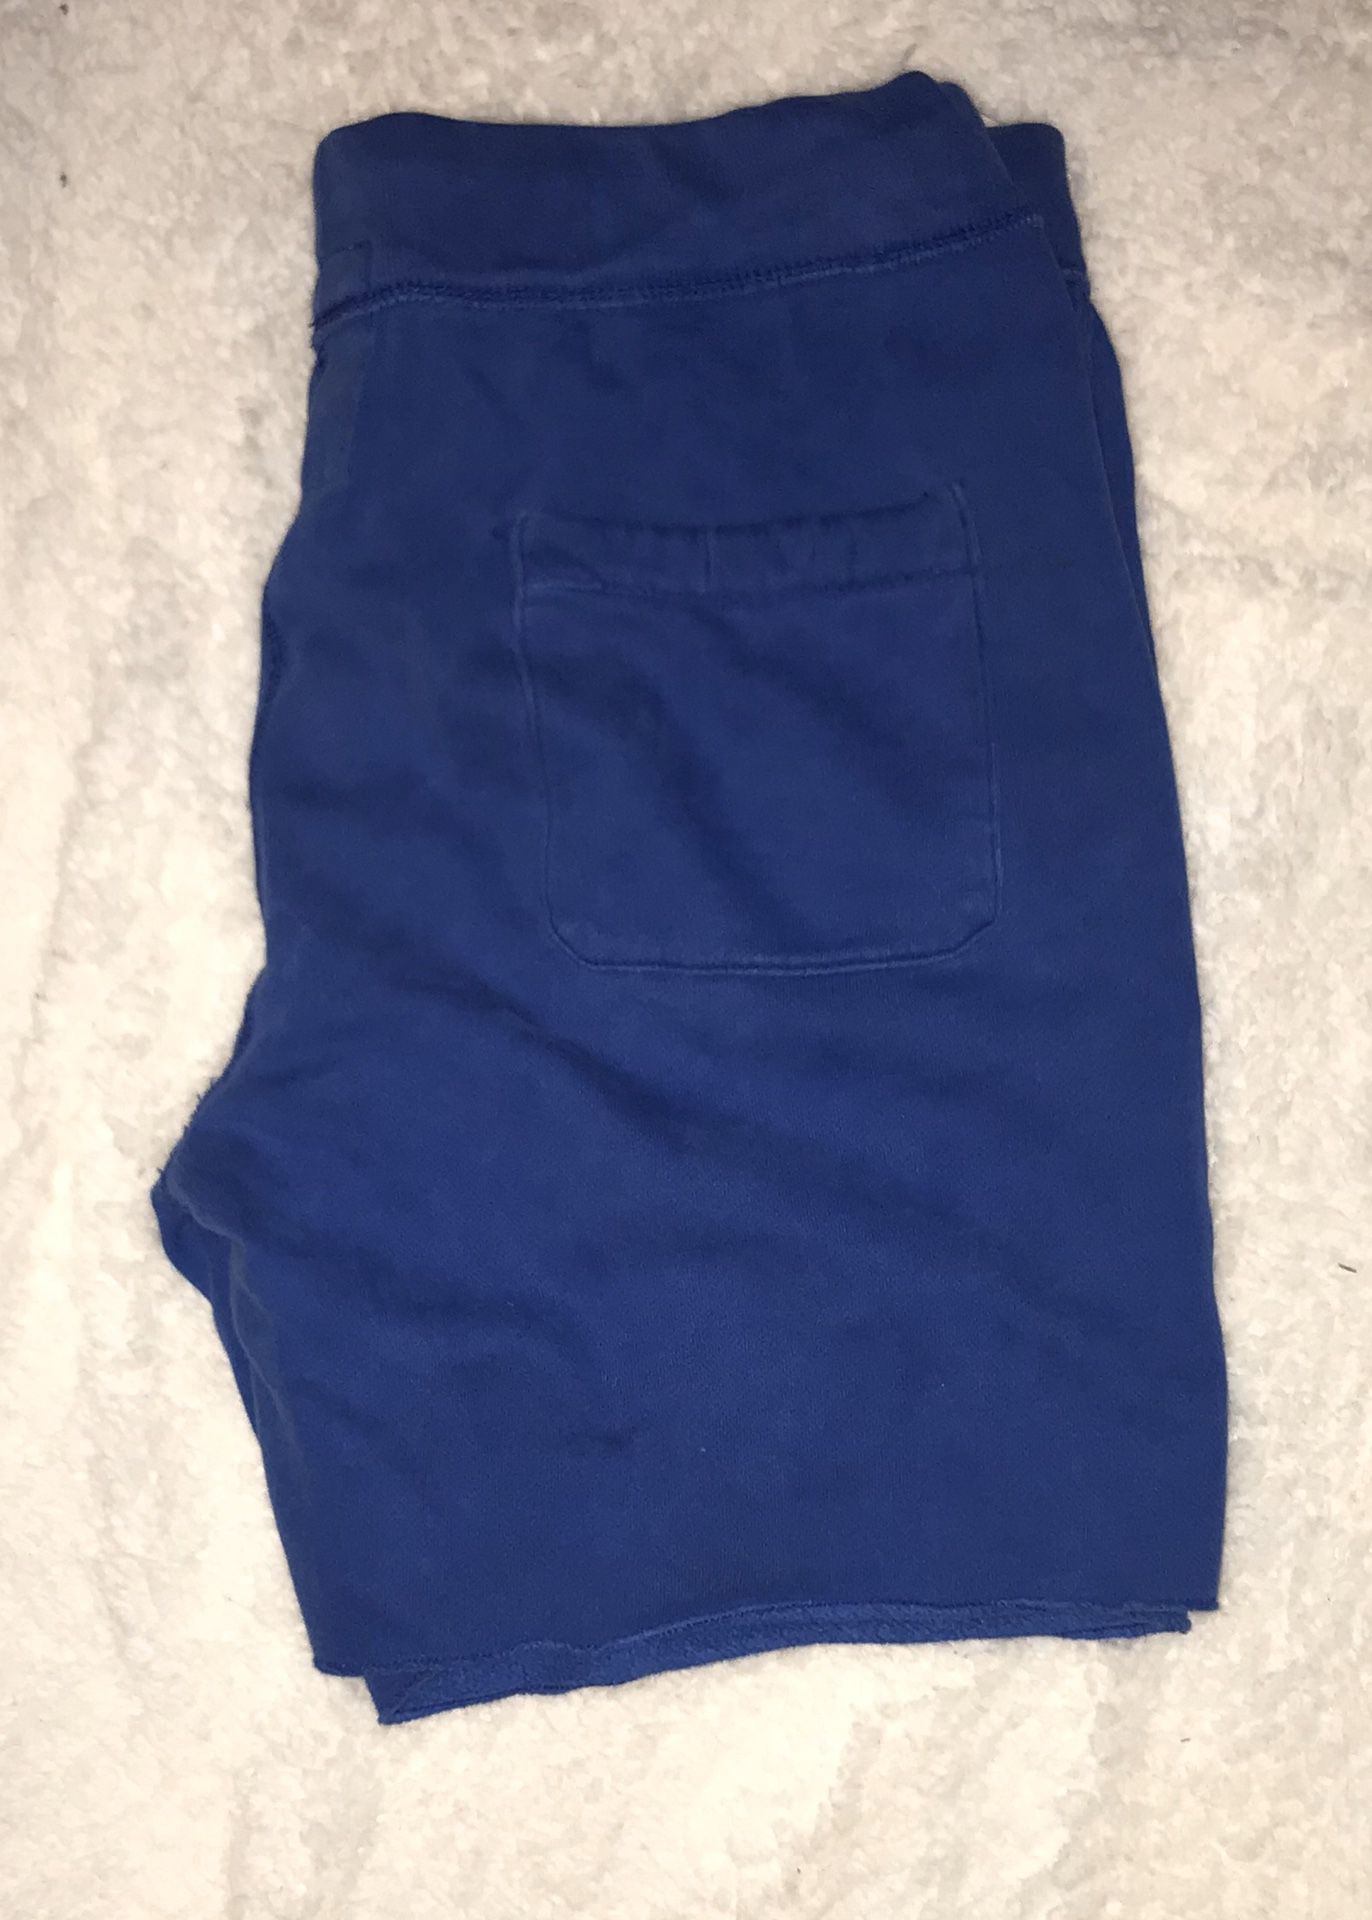 Men’s Hollister Shorts for Sale in Milford, OH - OfferUp